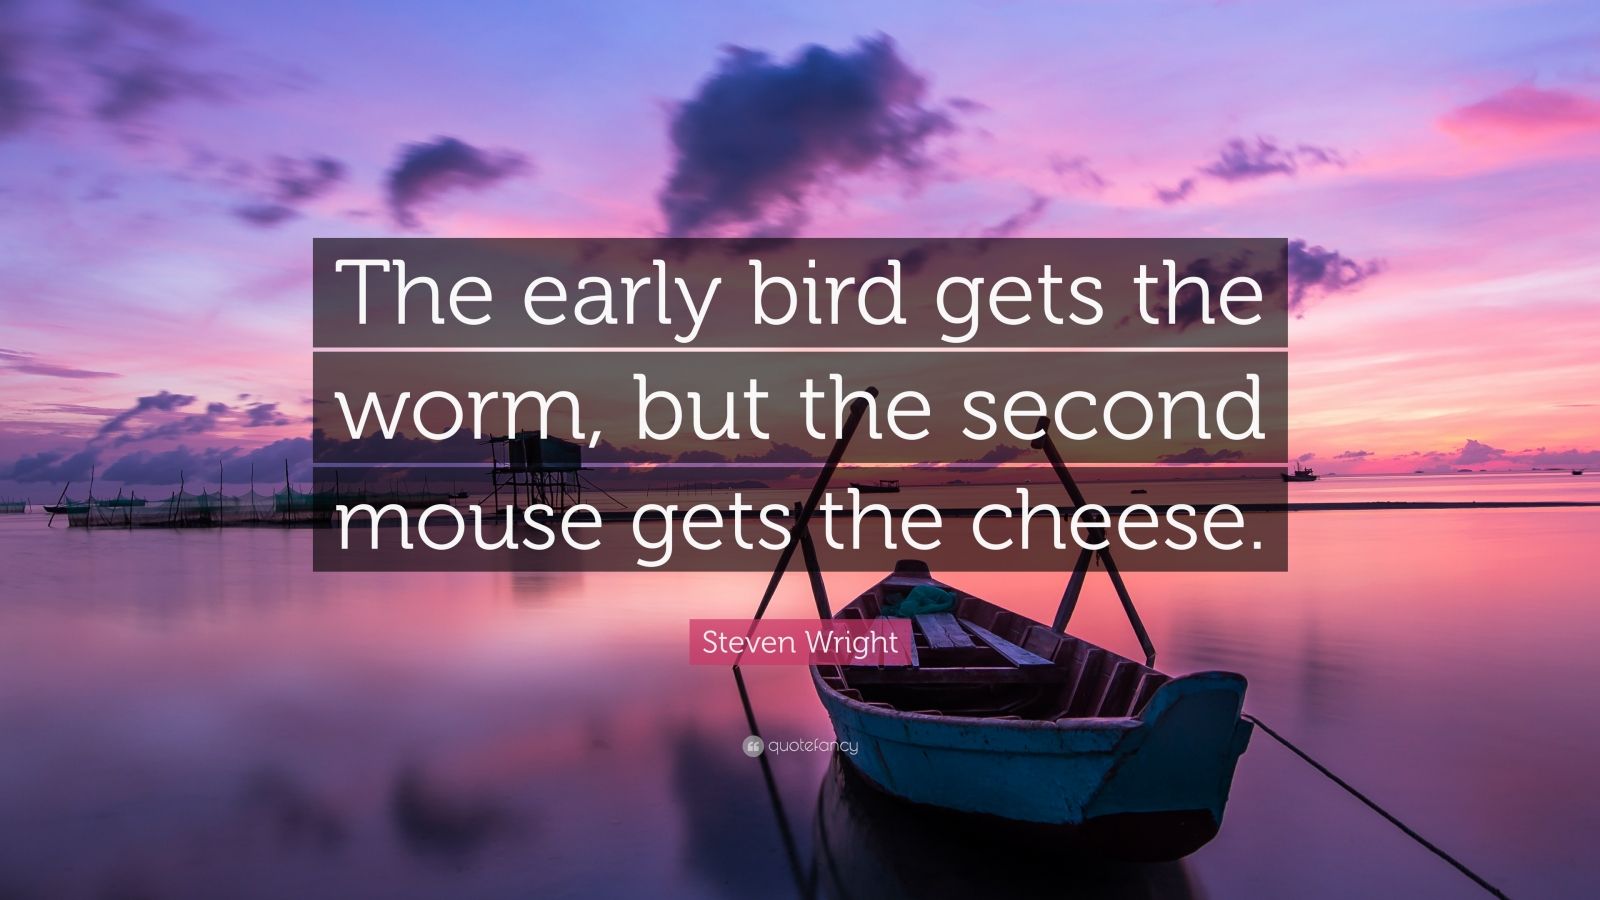 Steven Wright Quote: “The early bird gets the worm, but the second